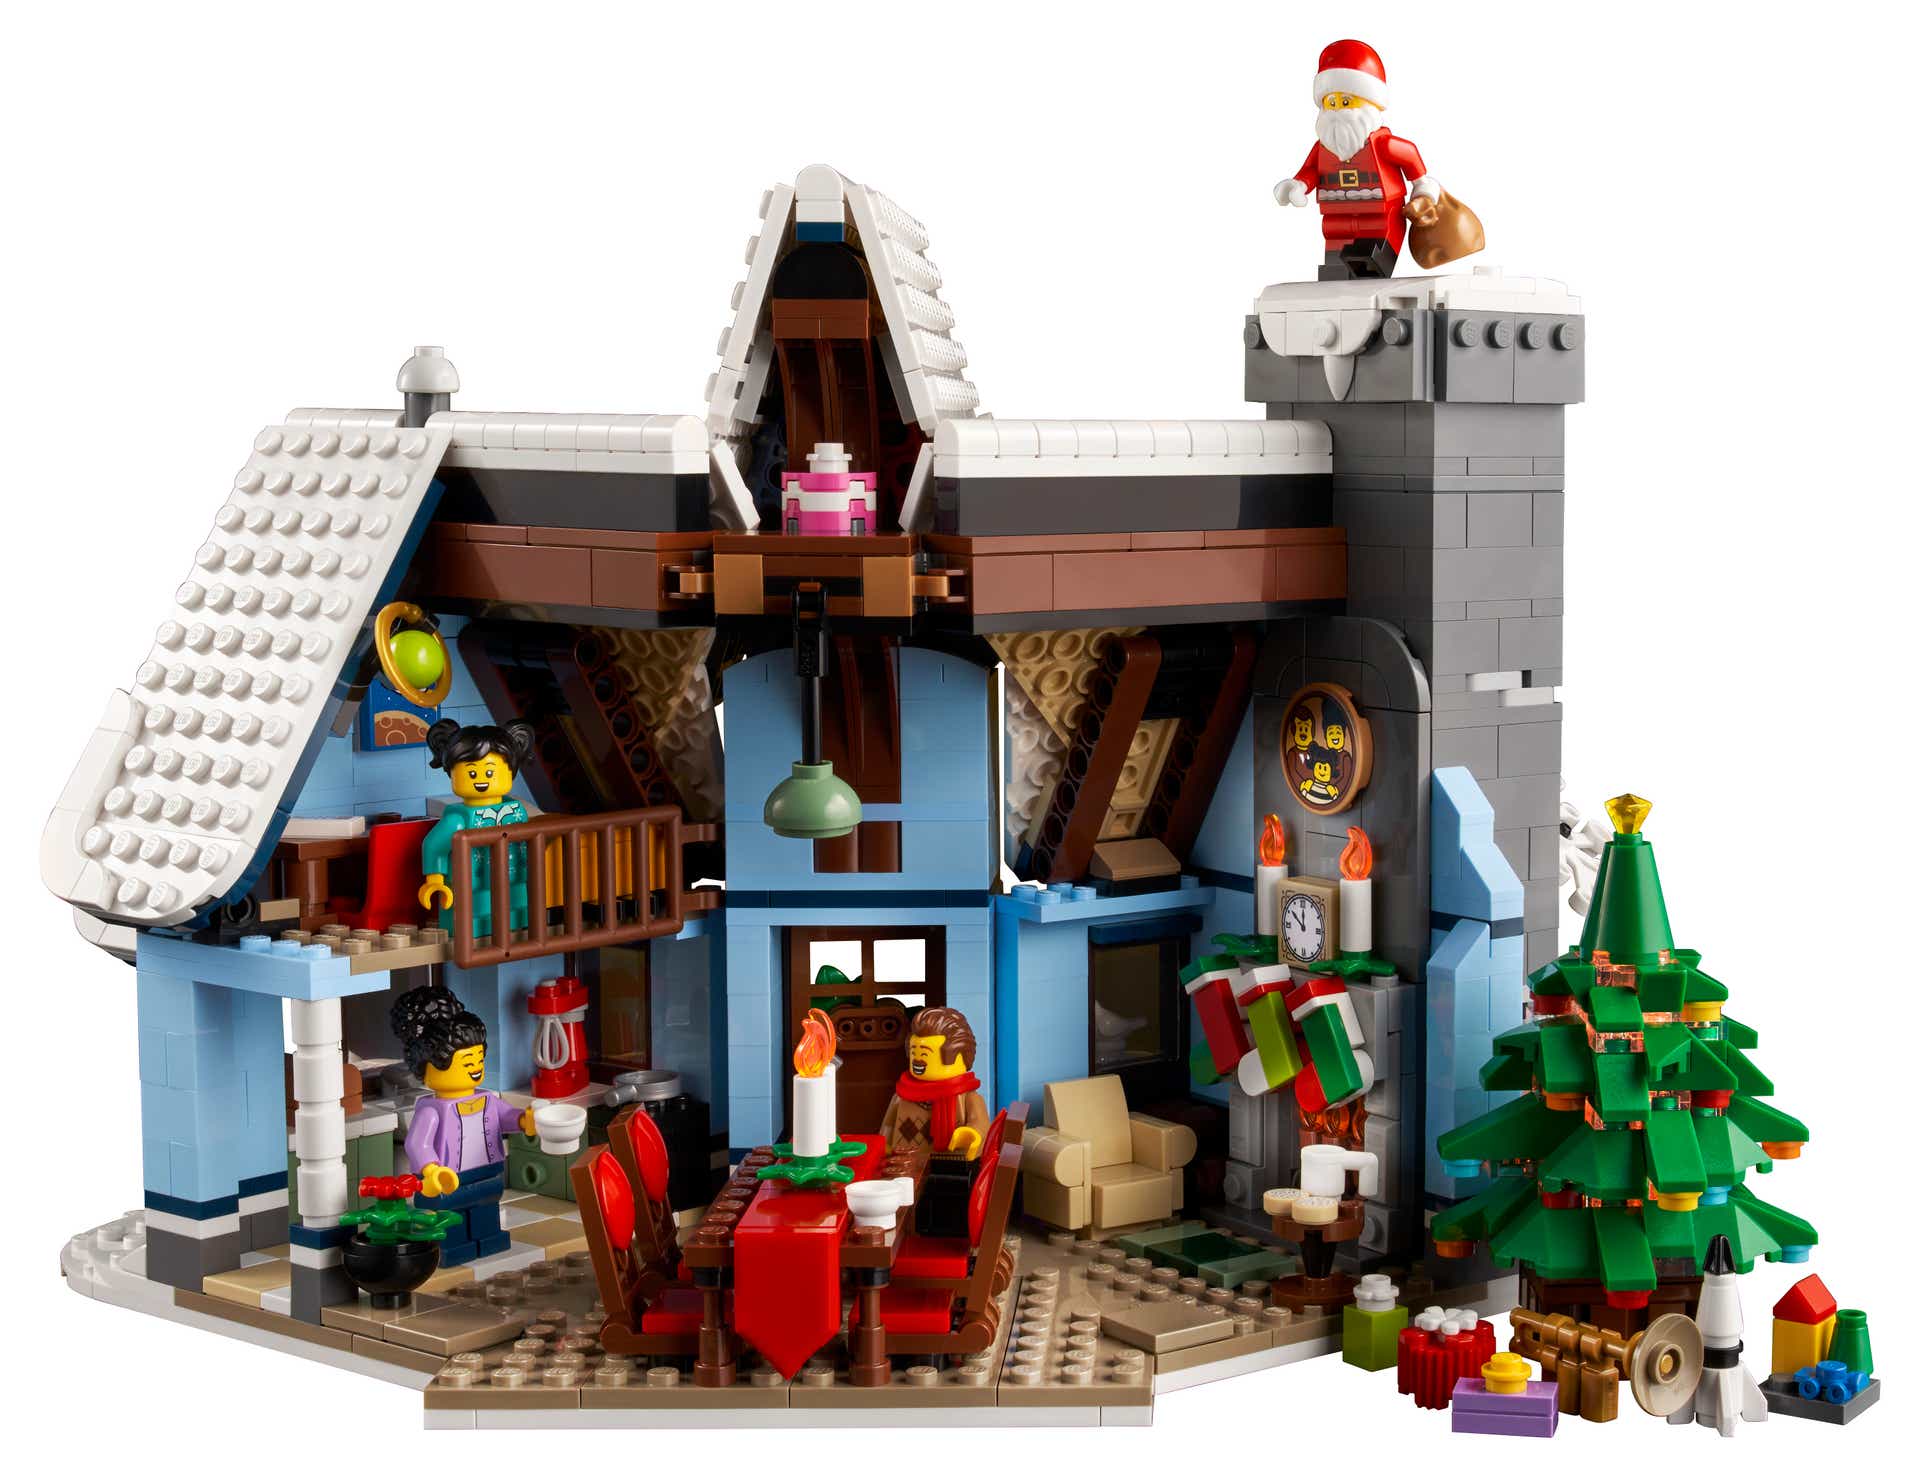 Spread holiday cheer with the LEGO® Santa’s Visit set About us LEGO